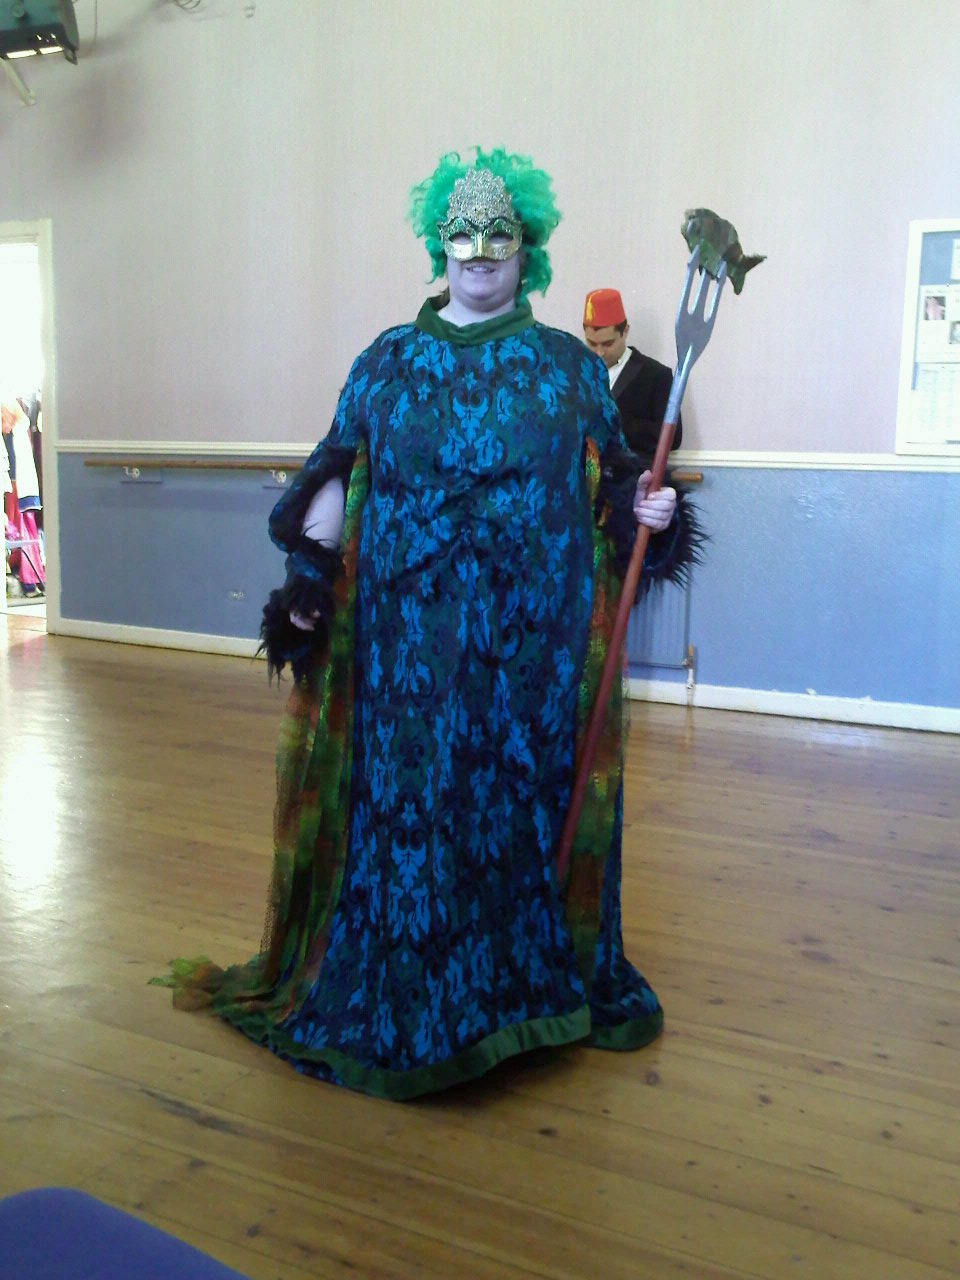 Dressed in the sea witch costume ready for pantomime